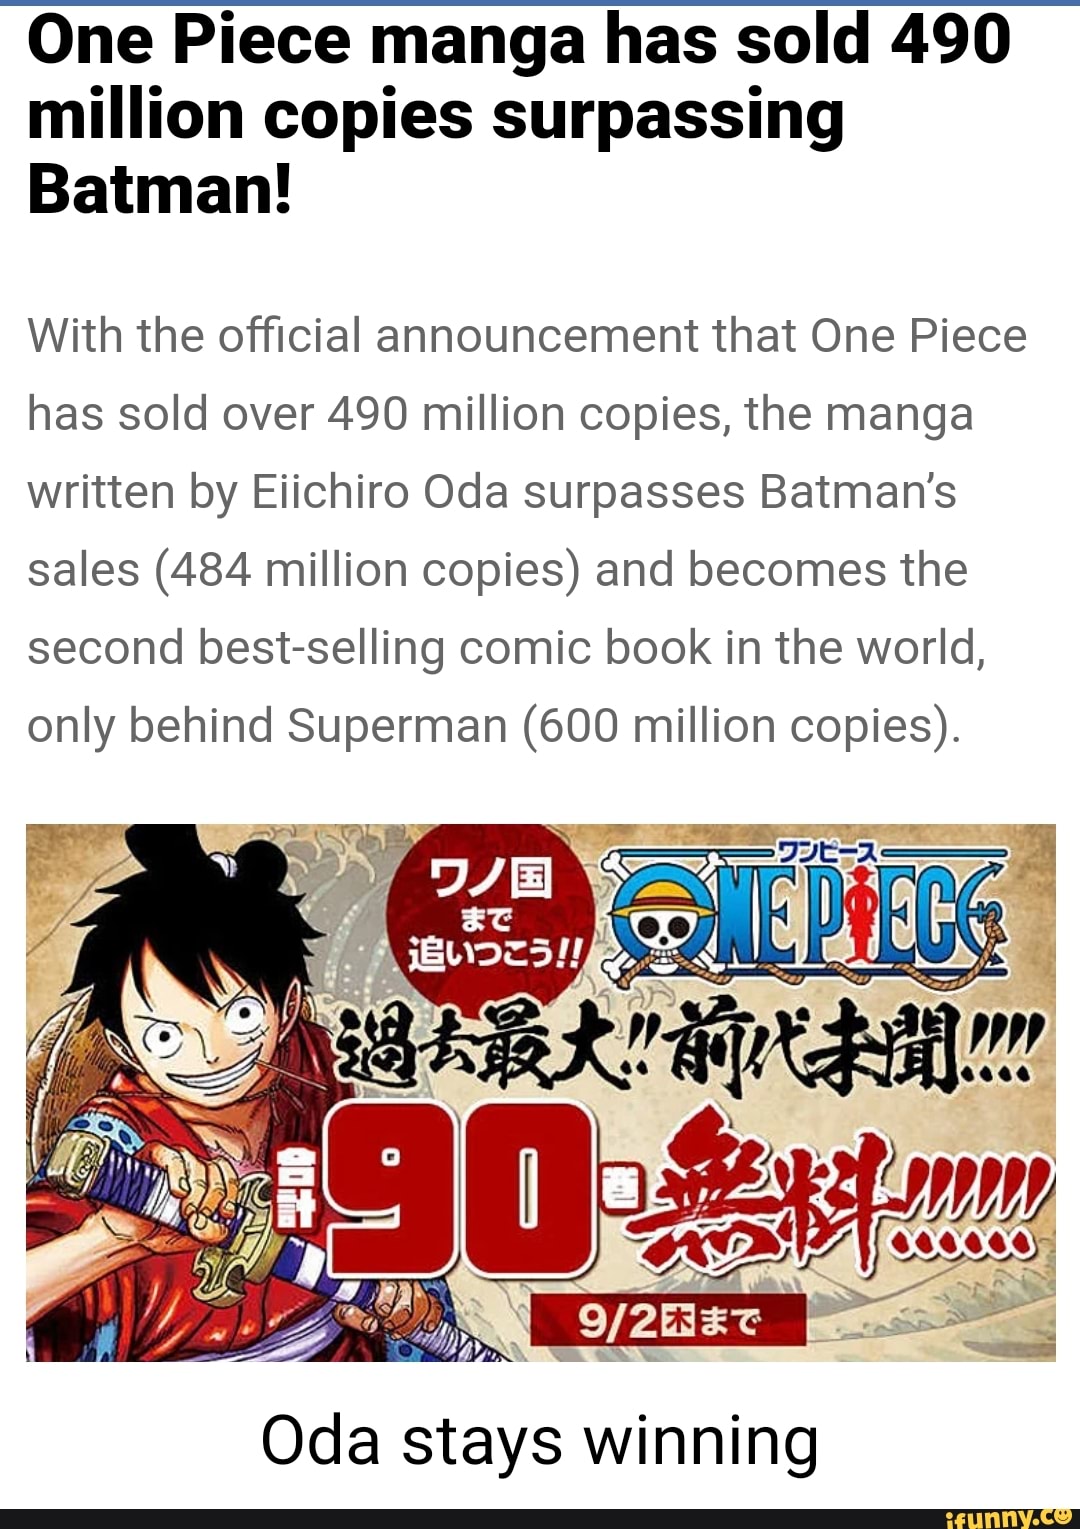 One Piece Manga Has Sold 490 Million Copies Surpassing Batman With The Official Announcement That One